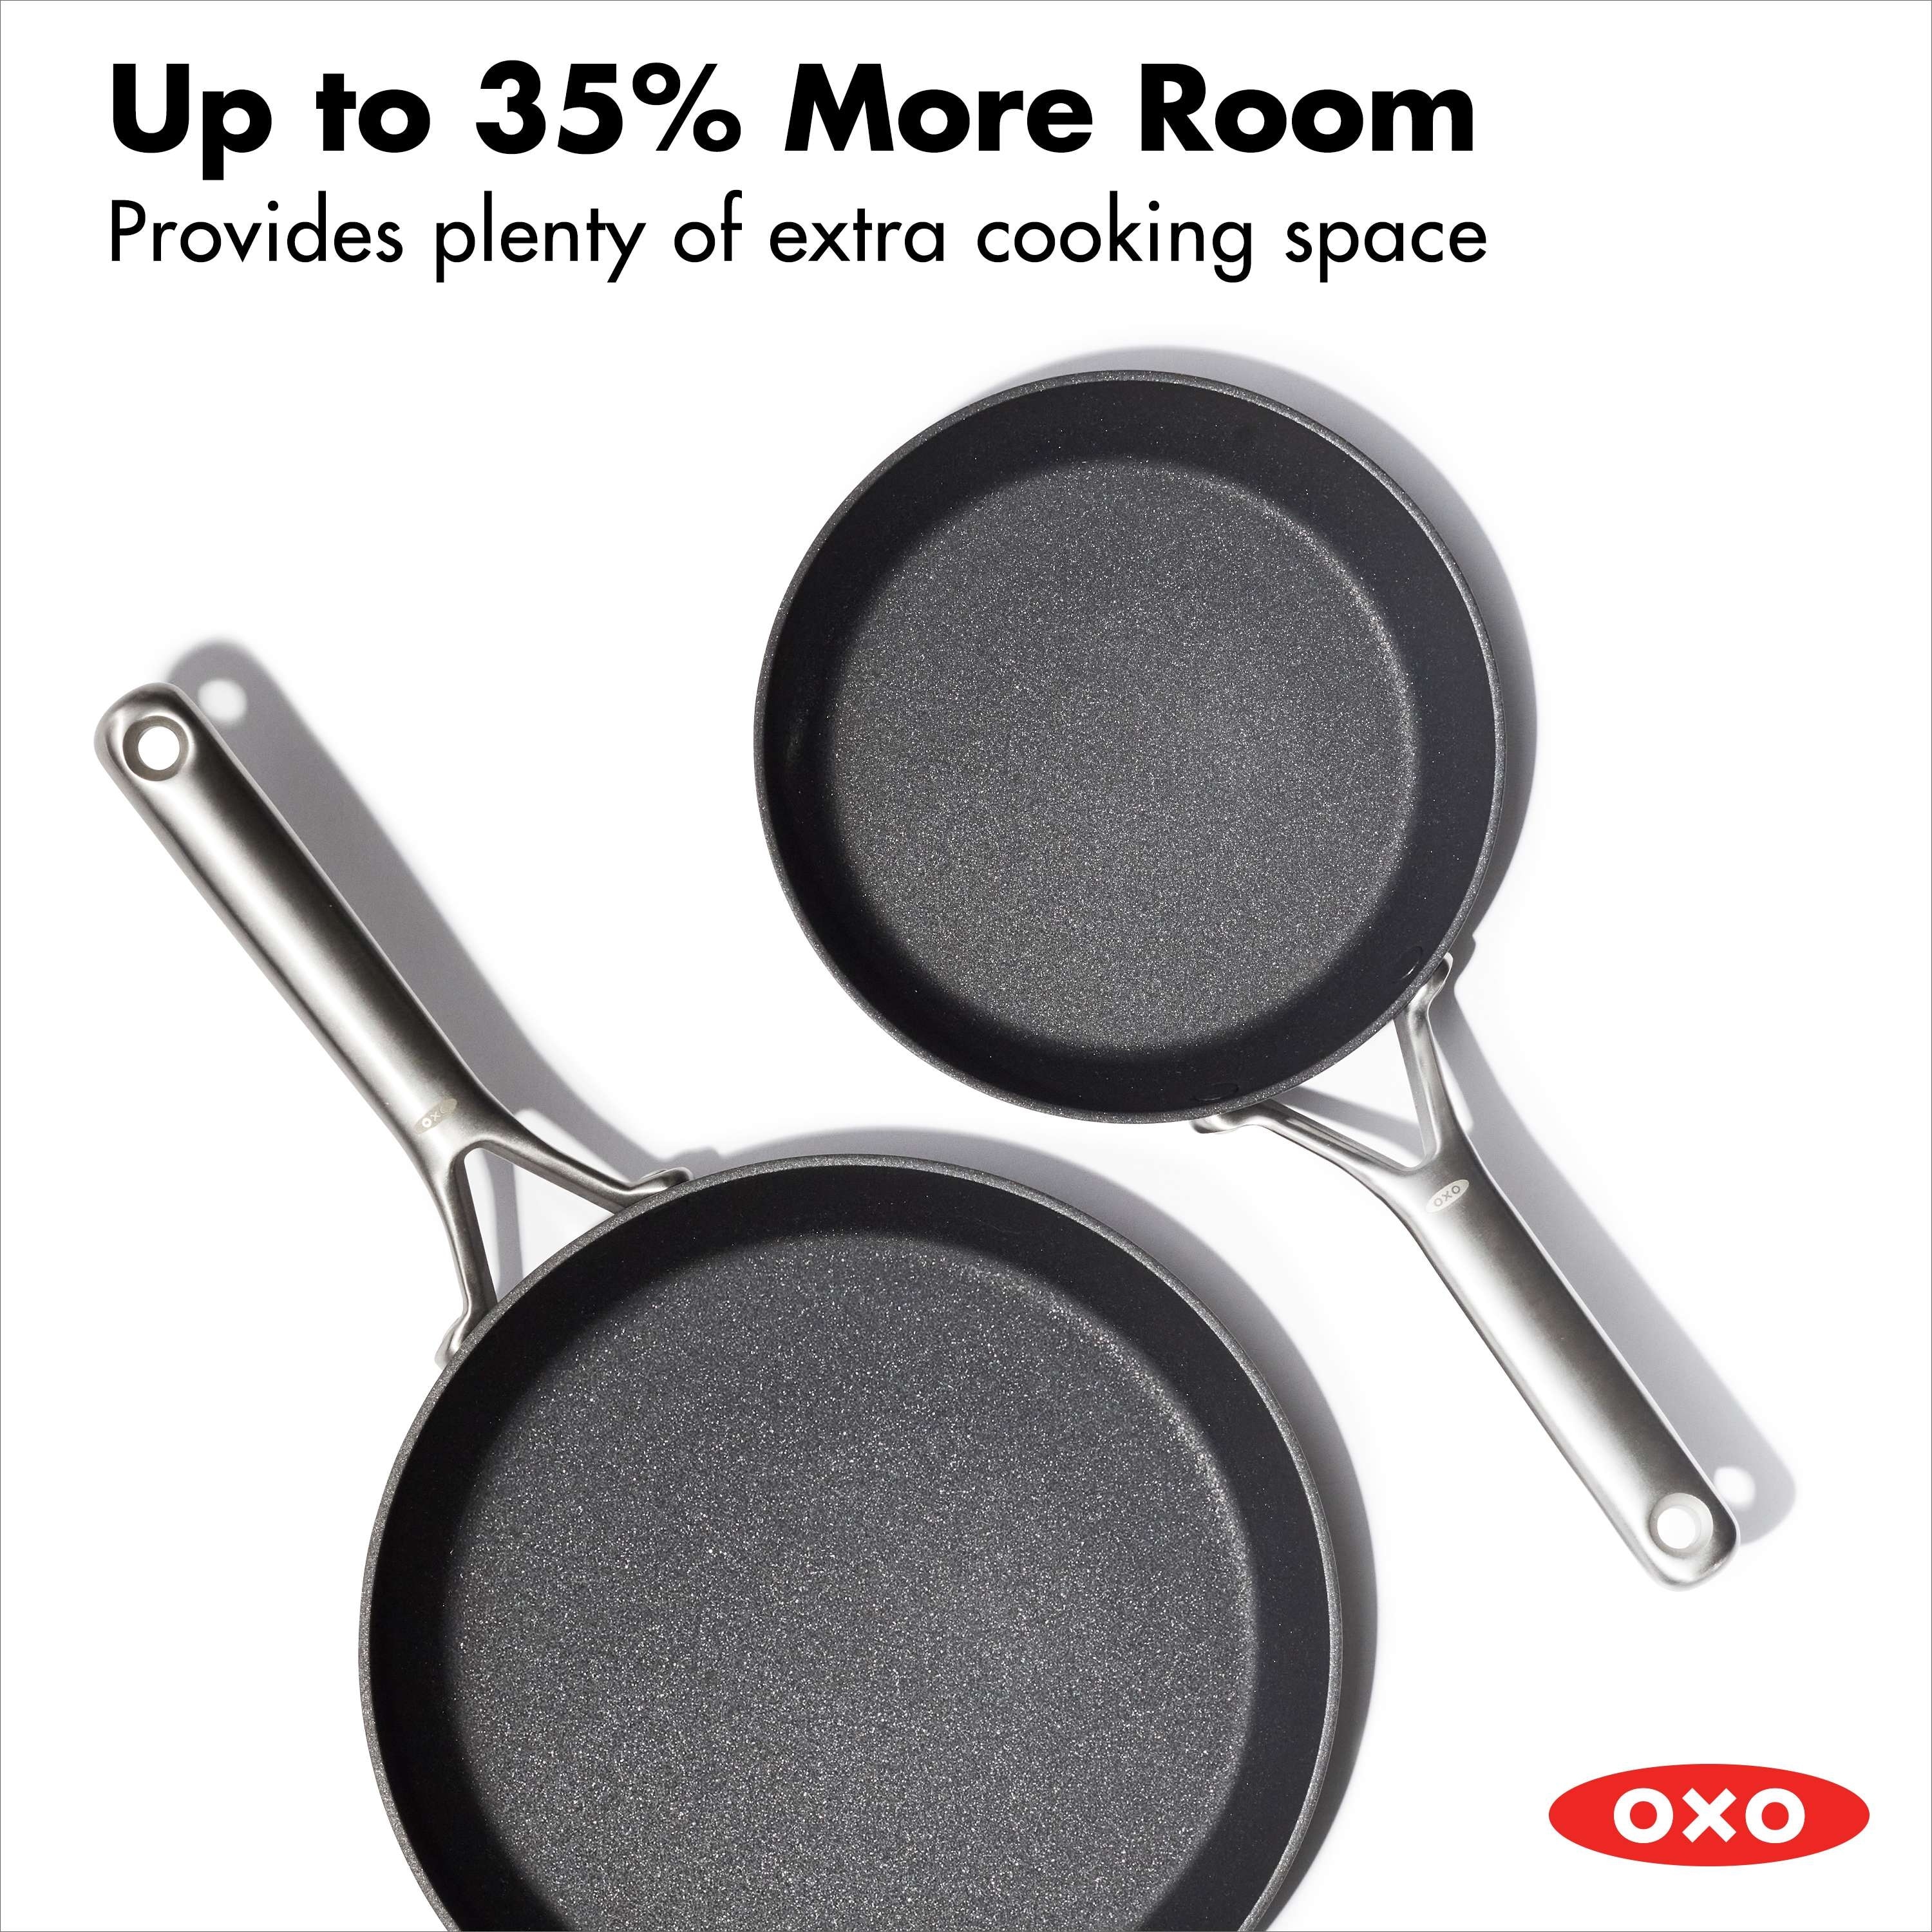 https://ak1.ostkcdn.com/images/products/is/images/direct/873da930f2af4158cf3d9d122c3fb026eb2da166/OXO-Professional-Ceramic-Non-Stick-2-Piece-Frying-Pan-Set%2C-8-In-and-10-In.jpg